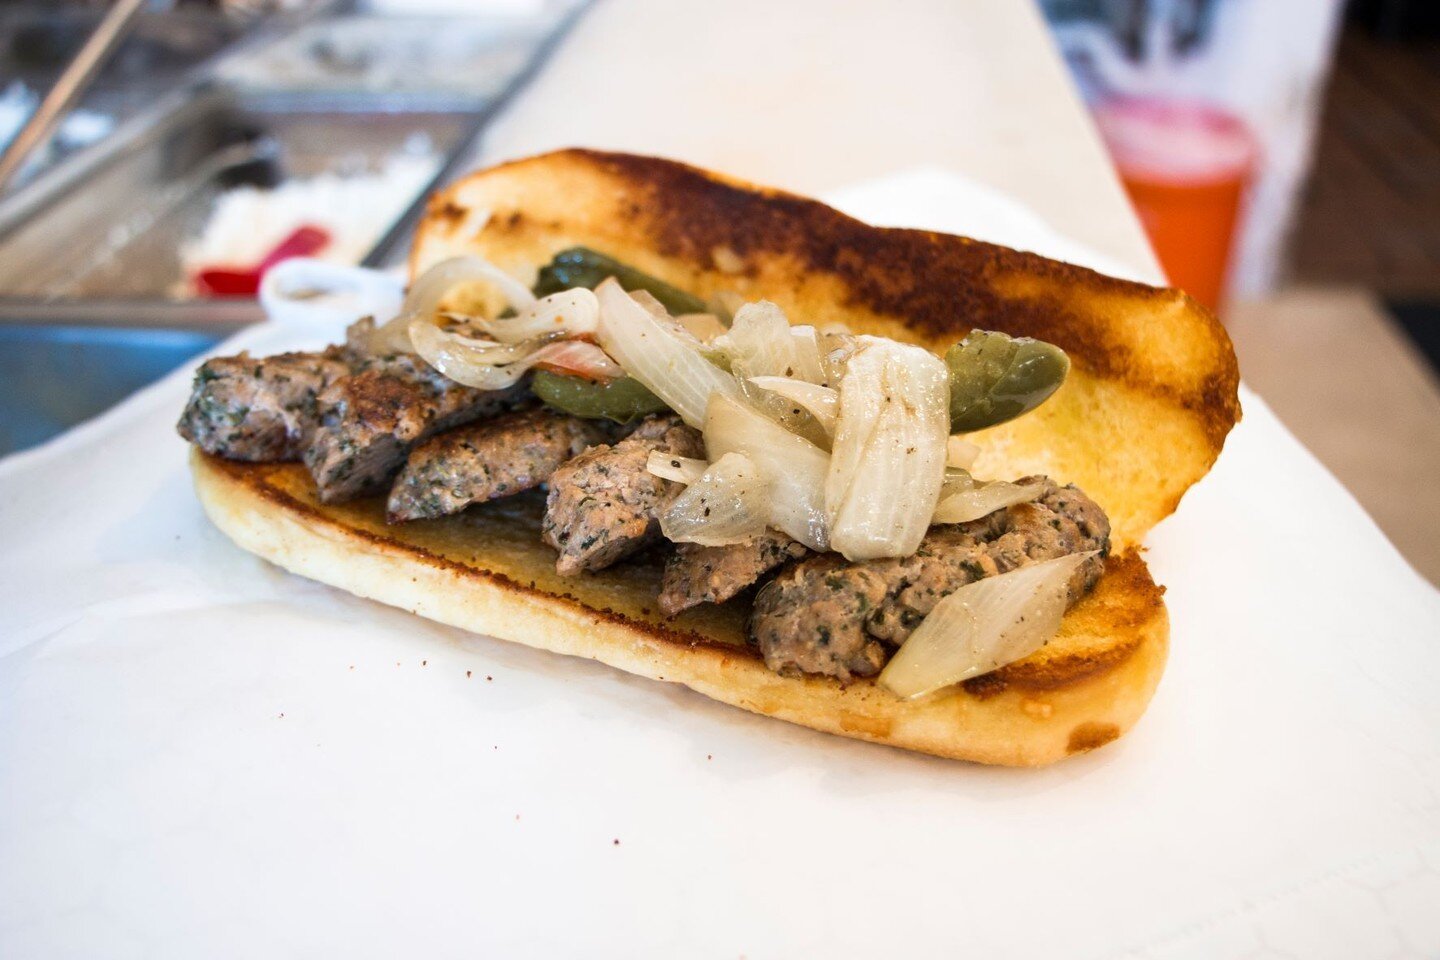 We get our Italian sausage local from The Hill,  just around the corner.

#vinnies #stl #eatstl #foodie #stlouisfoods #stlfoods #greek #italian #lindenwoodpark #sandwiches #special #lunch #dinner #smallbusiness #local #sandwichshop